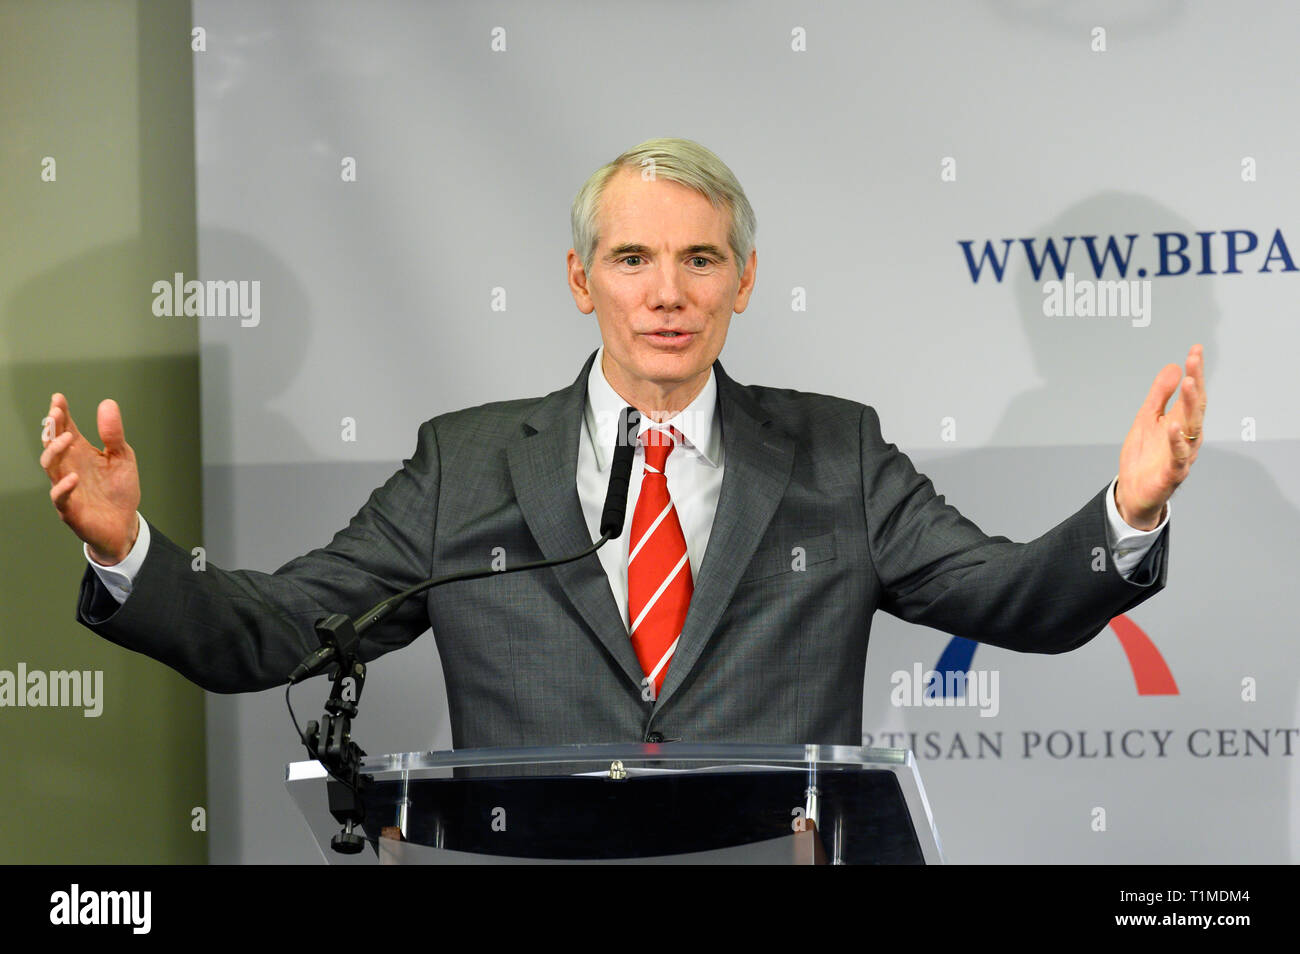 U.S. Senator Rob Portman (R-OH) seen speaking during a program titled 'Tracking Federal Funding to Combat the Opioid Crisis' at the Bipartisan Policy Center in Washington, DC. Stock Photo